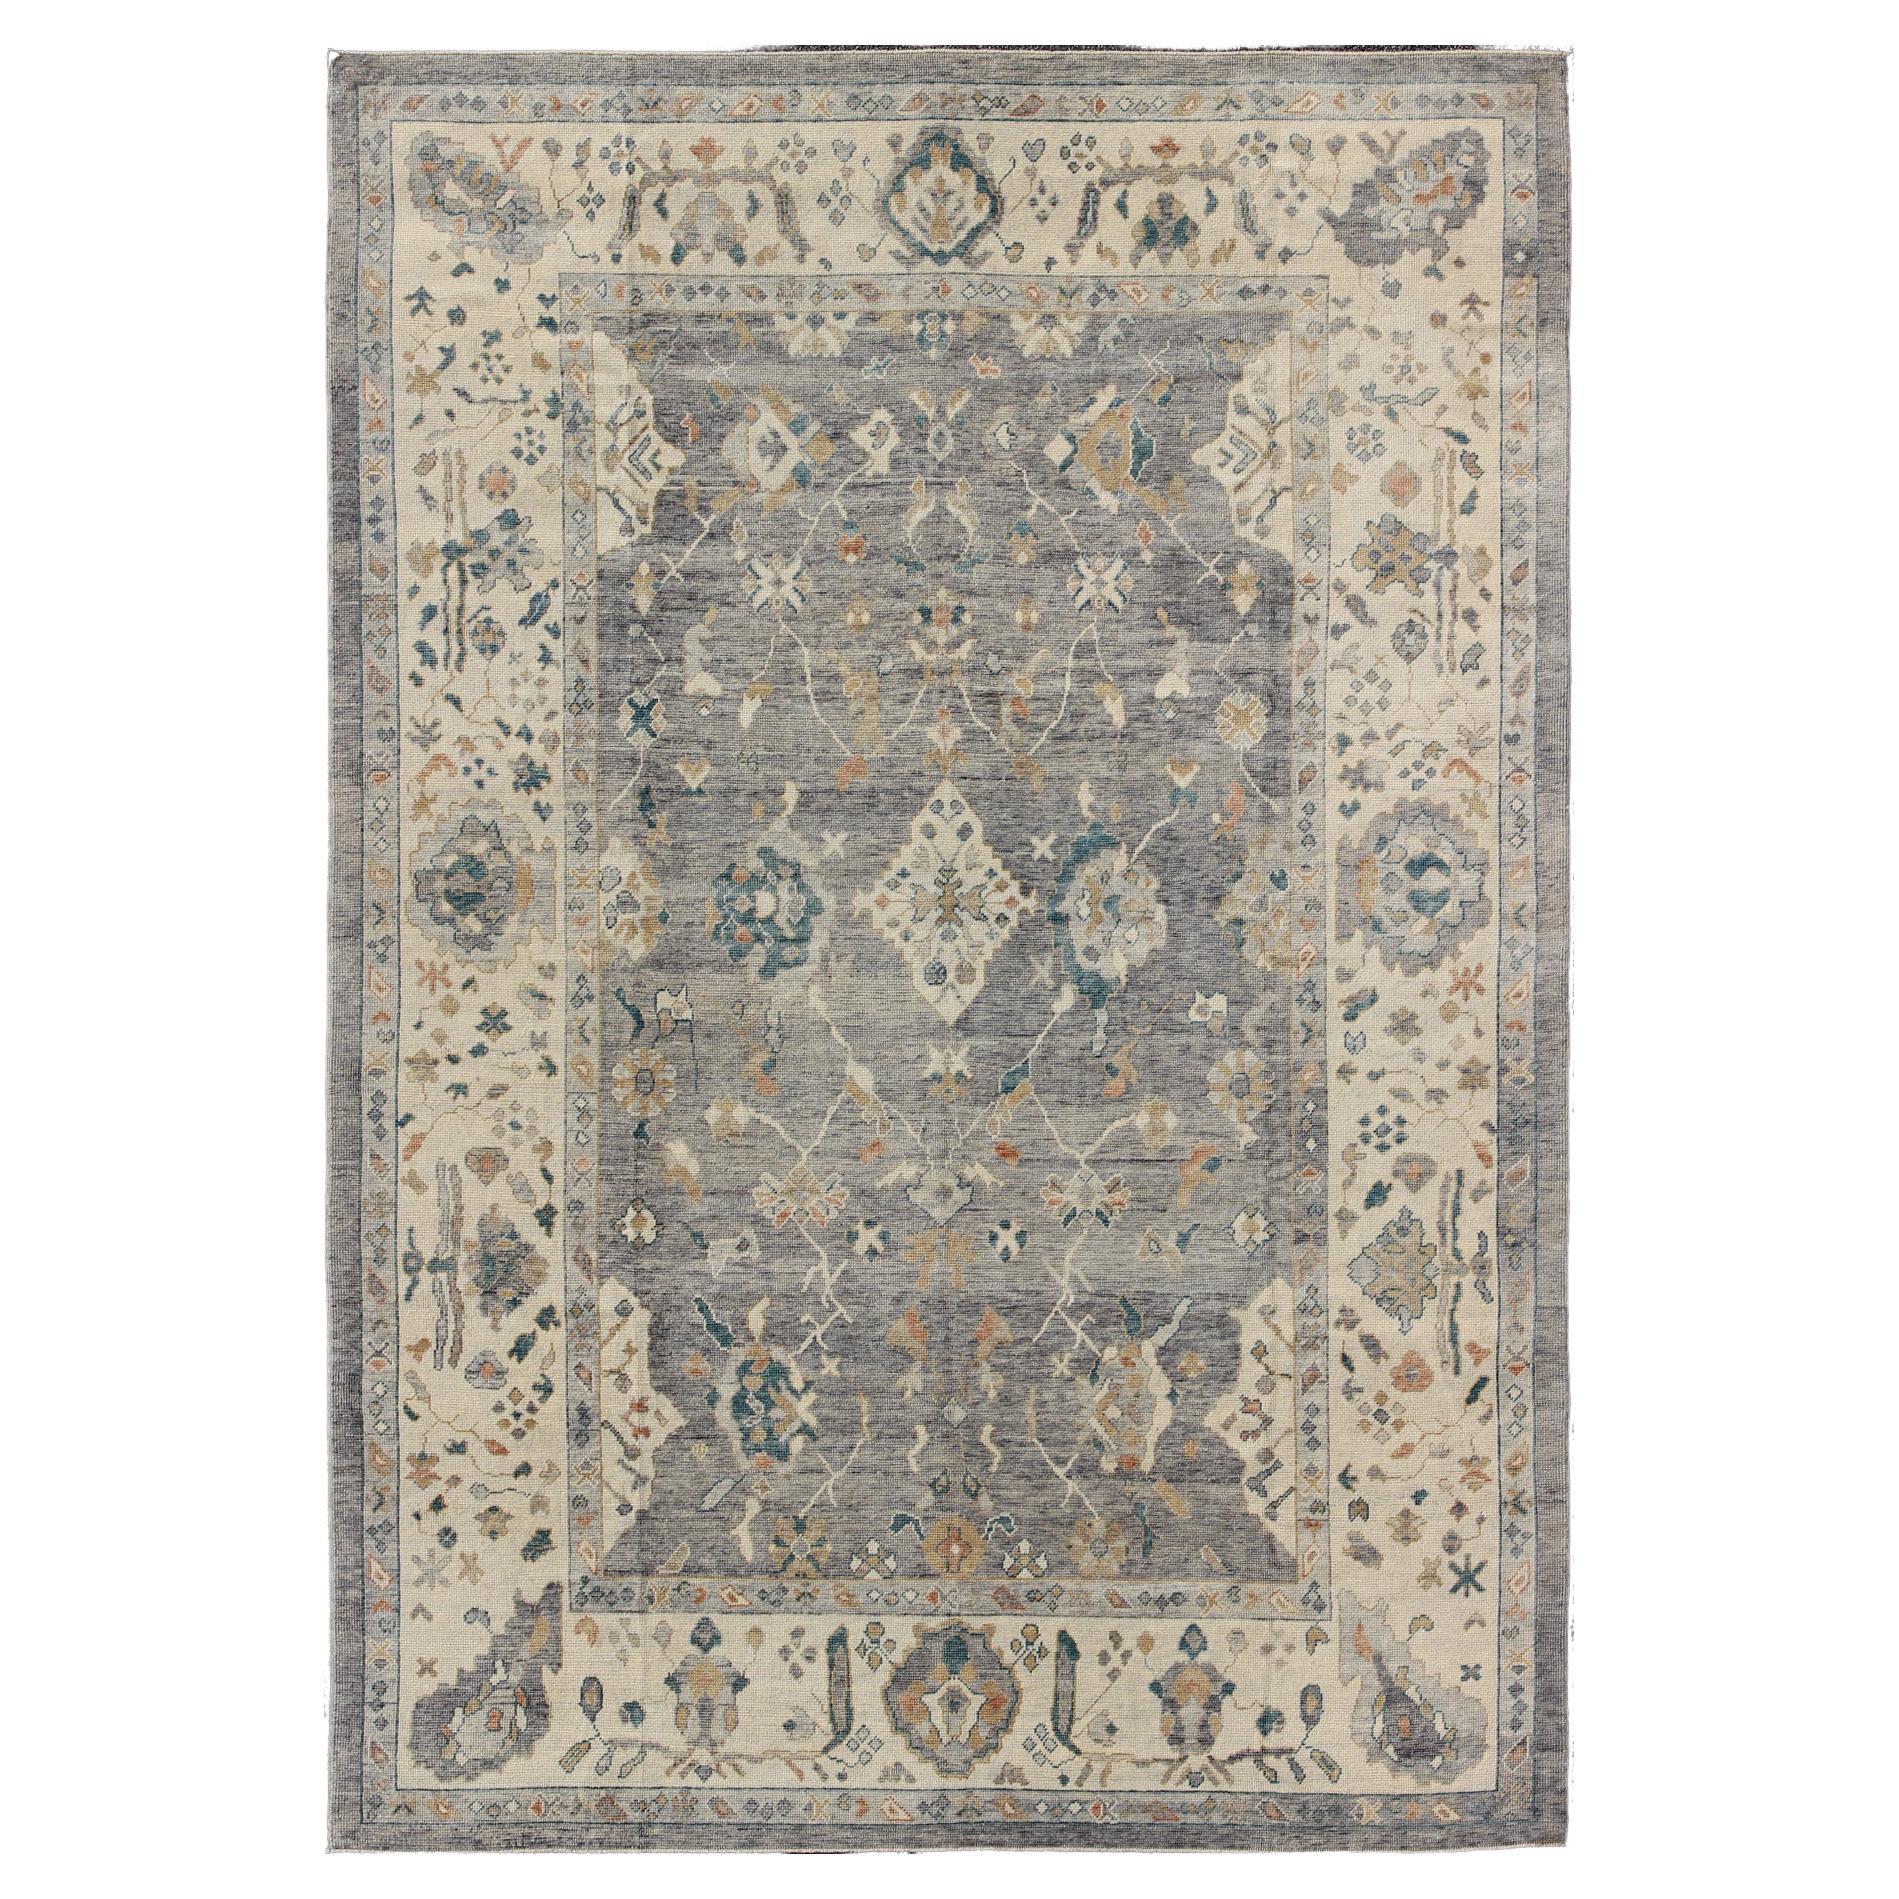 Tribal Design Hand Knotted Turkish Oushak Rug with Gray and Multi Colors